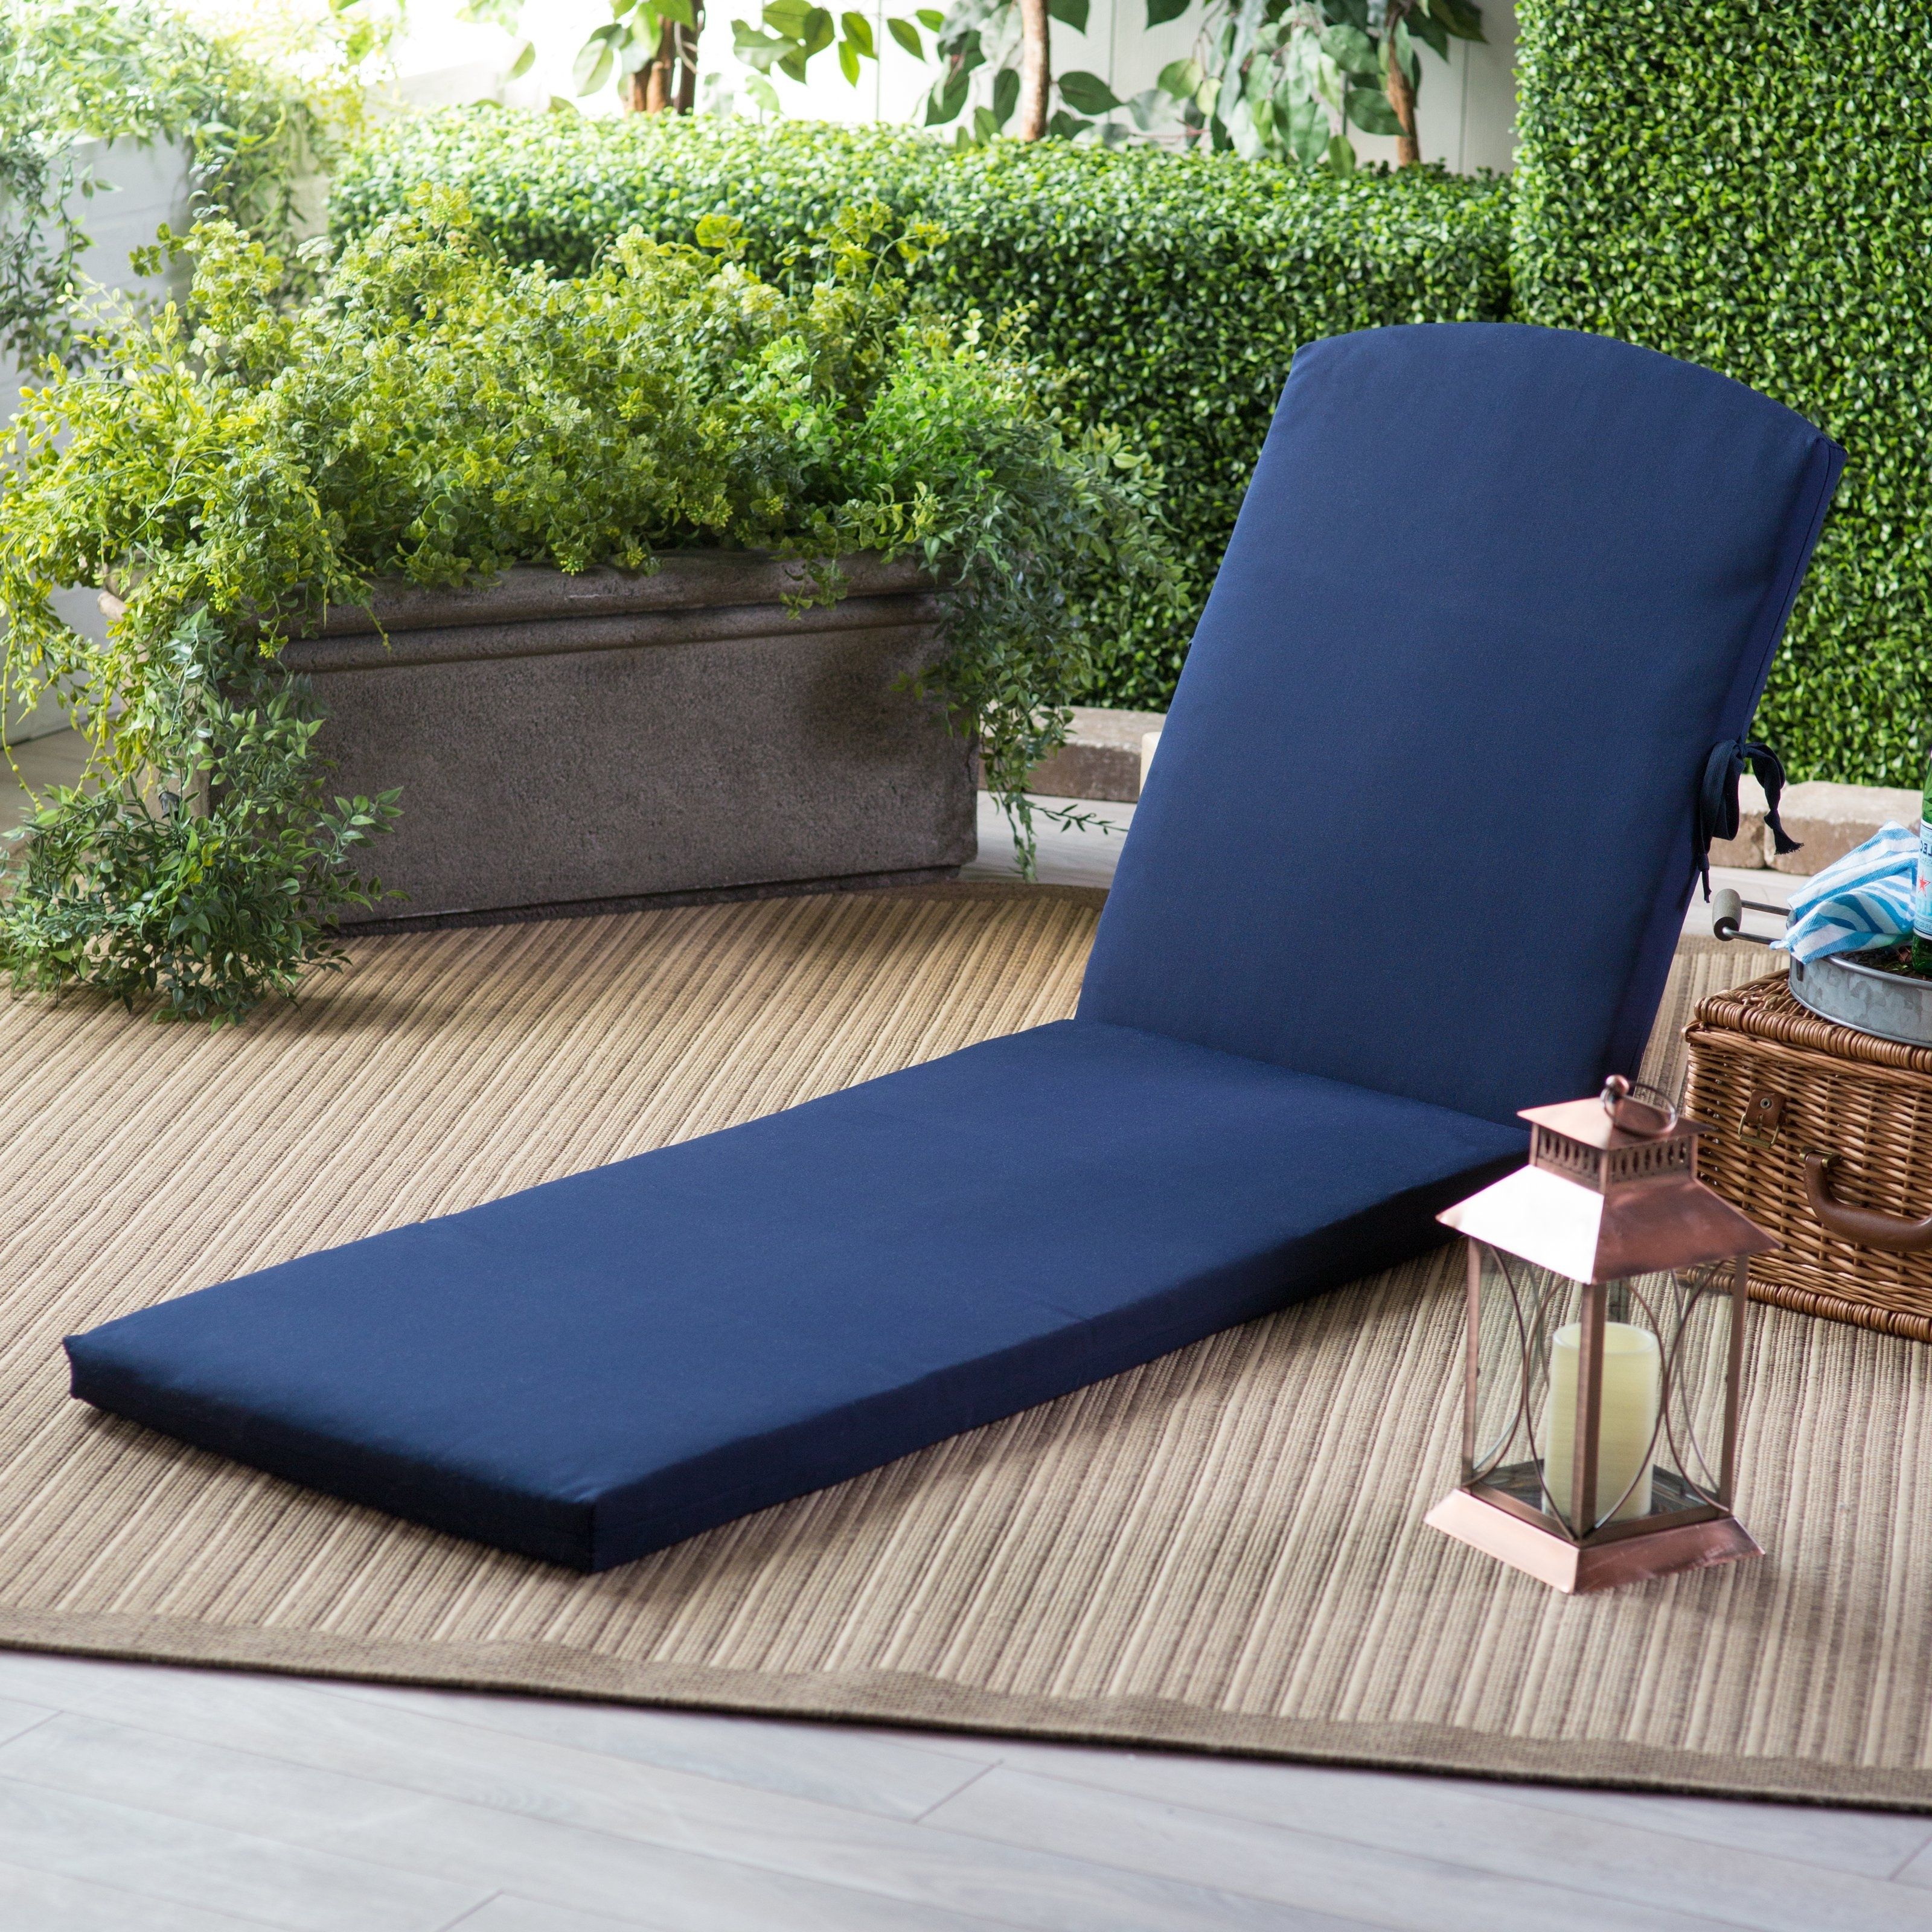 Cushion Pads For Outdoor Chaise Lounge Chairs Within Newest Chaise Lounge Chair Pads • Lounge Chairs Ideas (View 1 of 15)